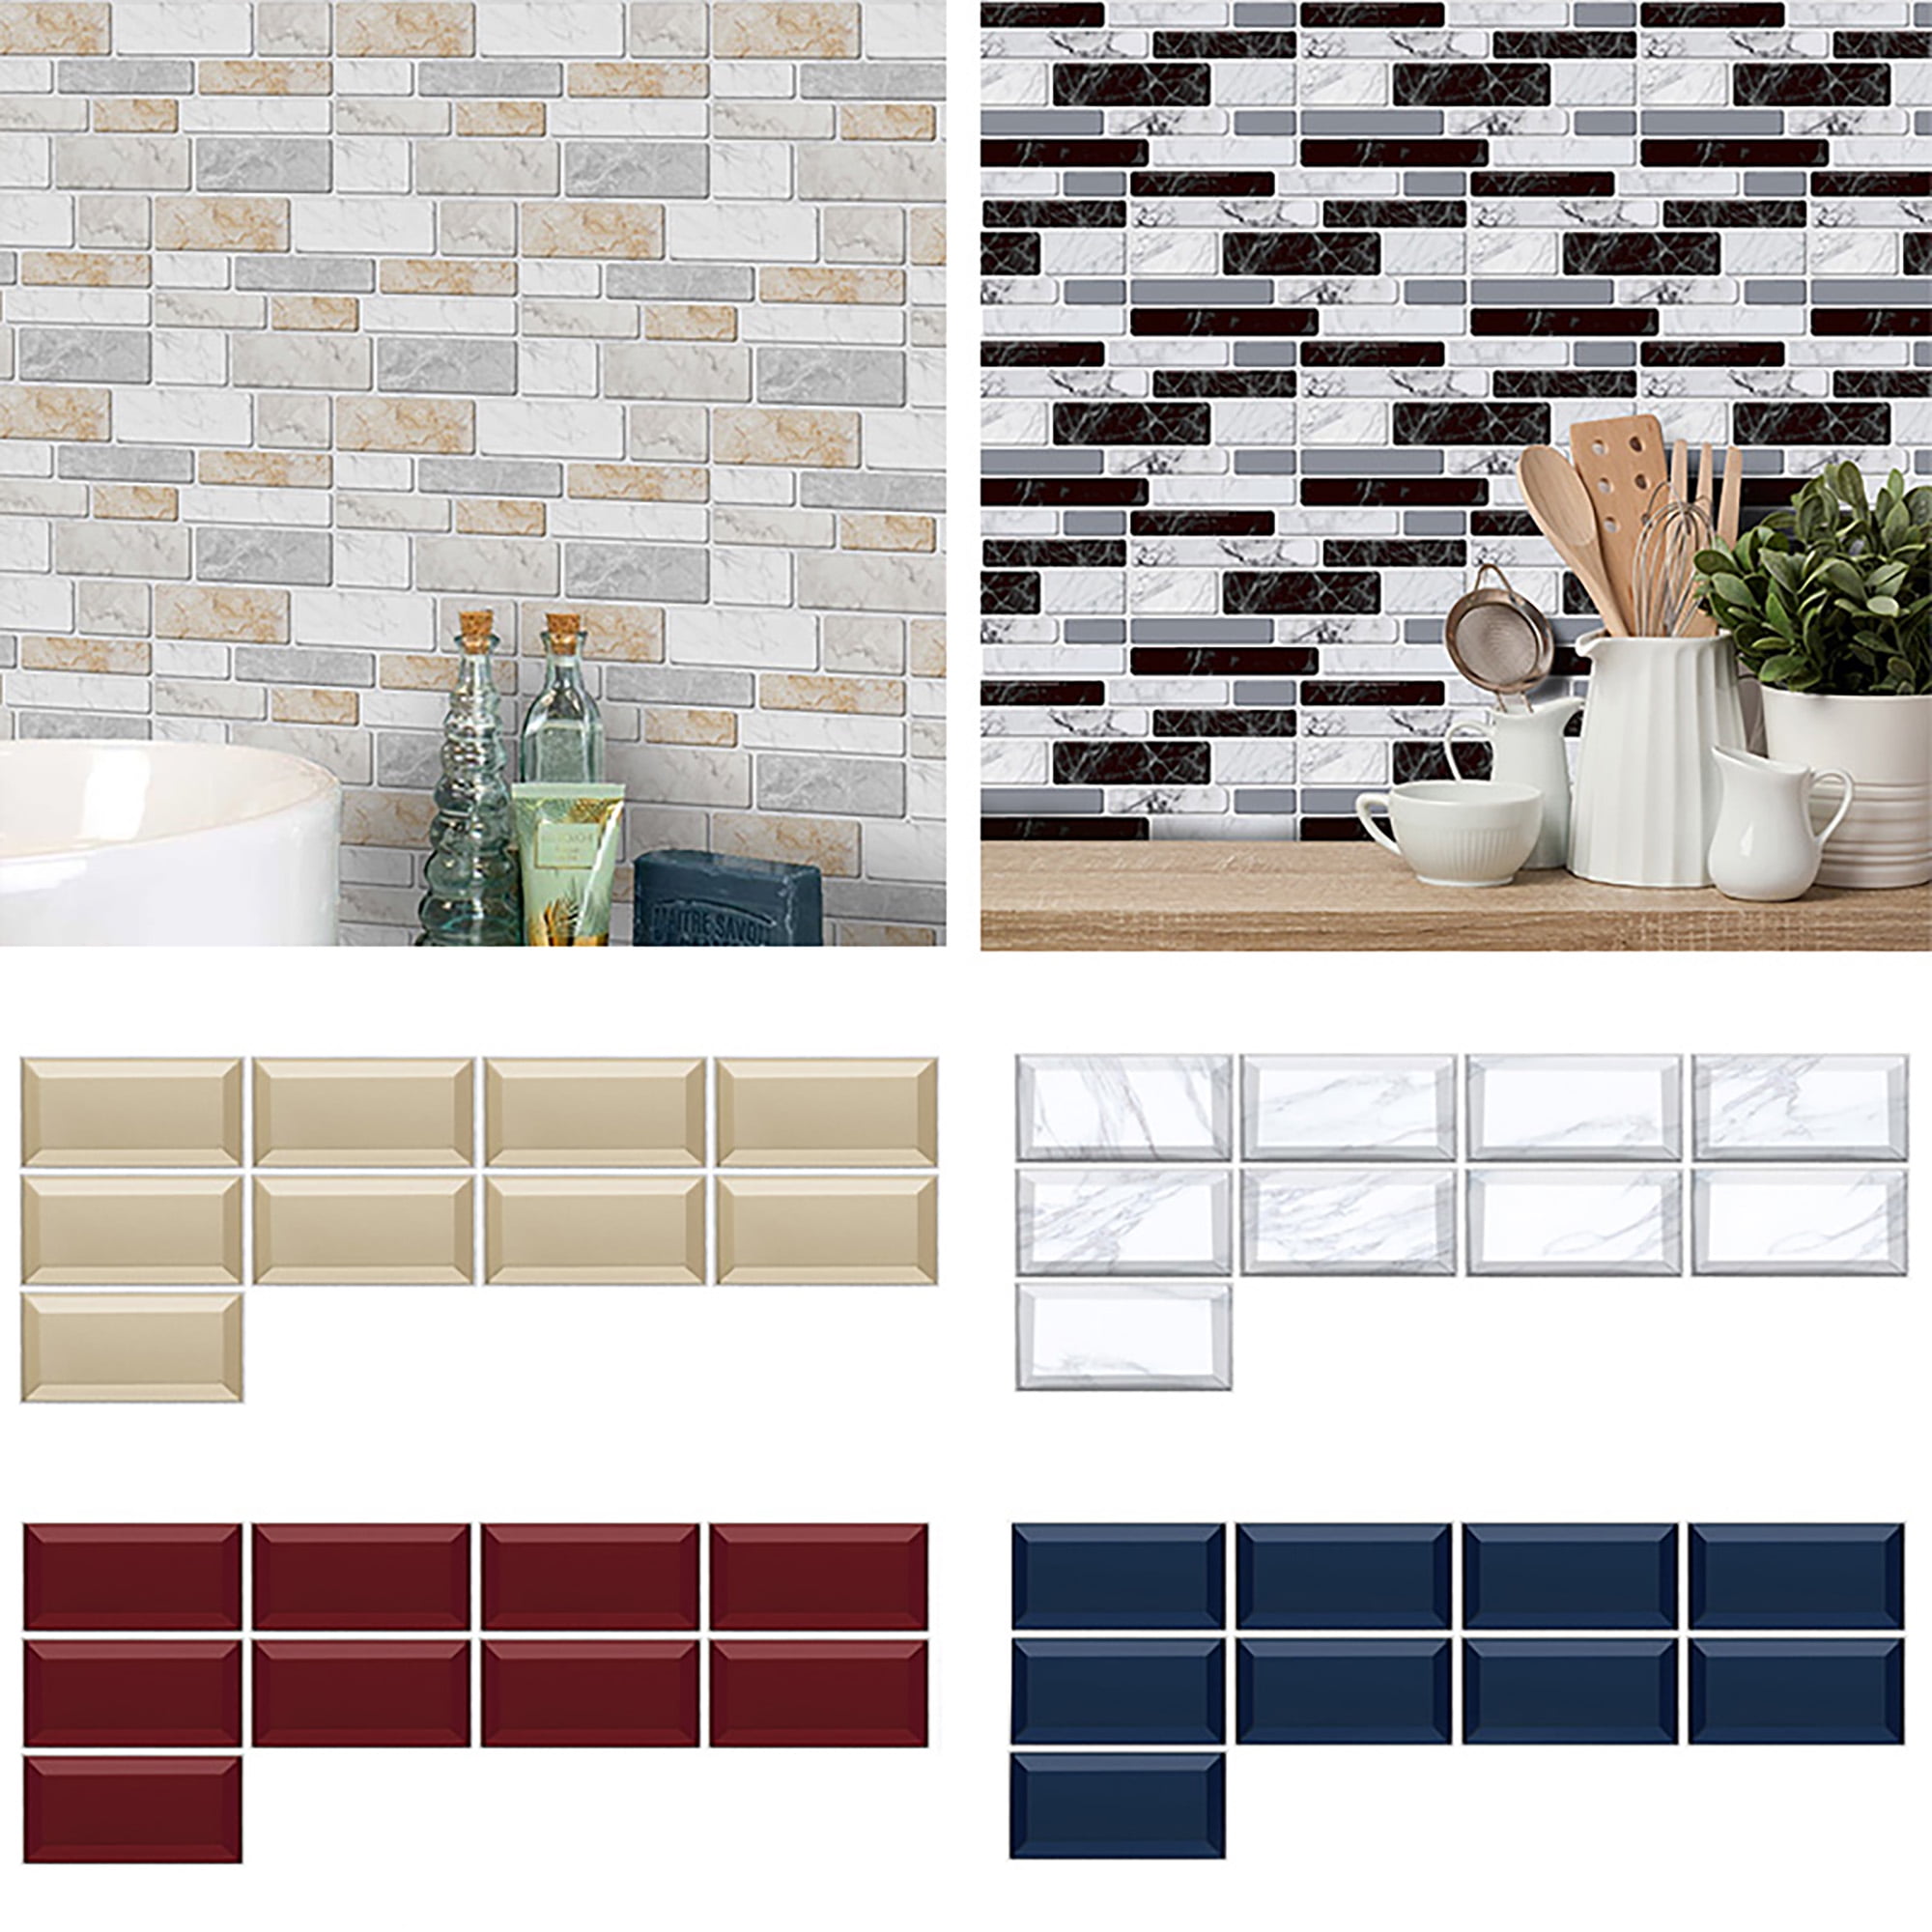 3D Mosaic Sticker Kitchen Tile Stickers Bathroom Self-adhesive Wall Home Decor